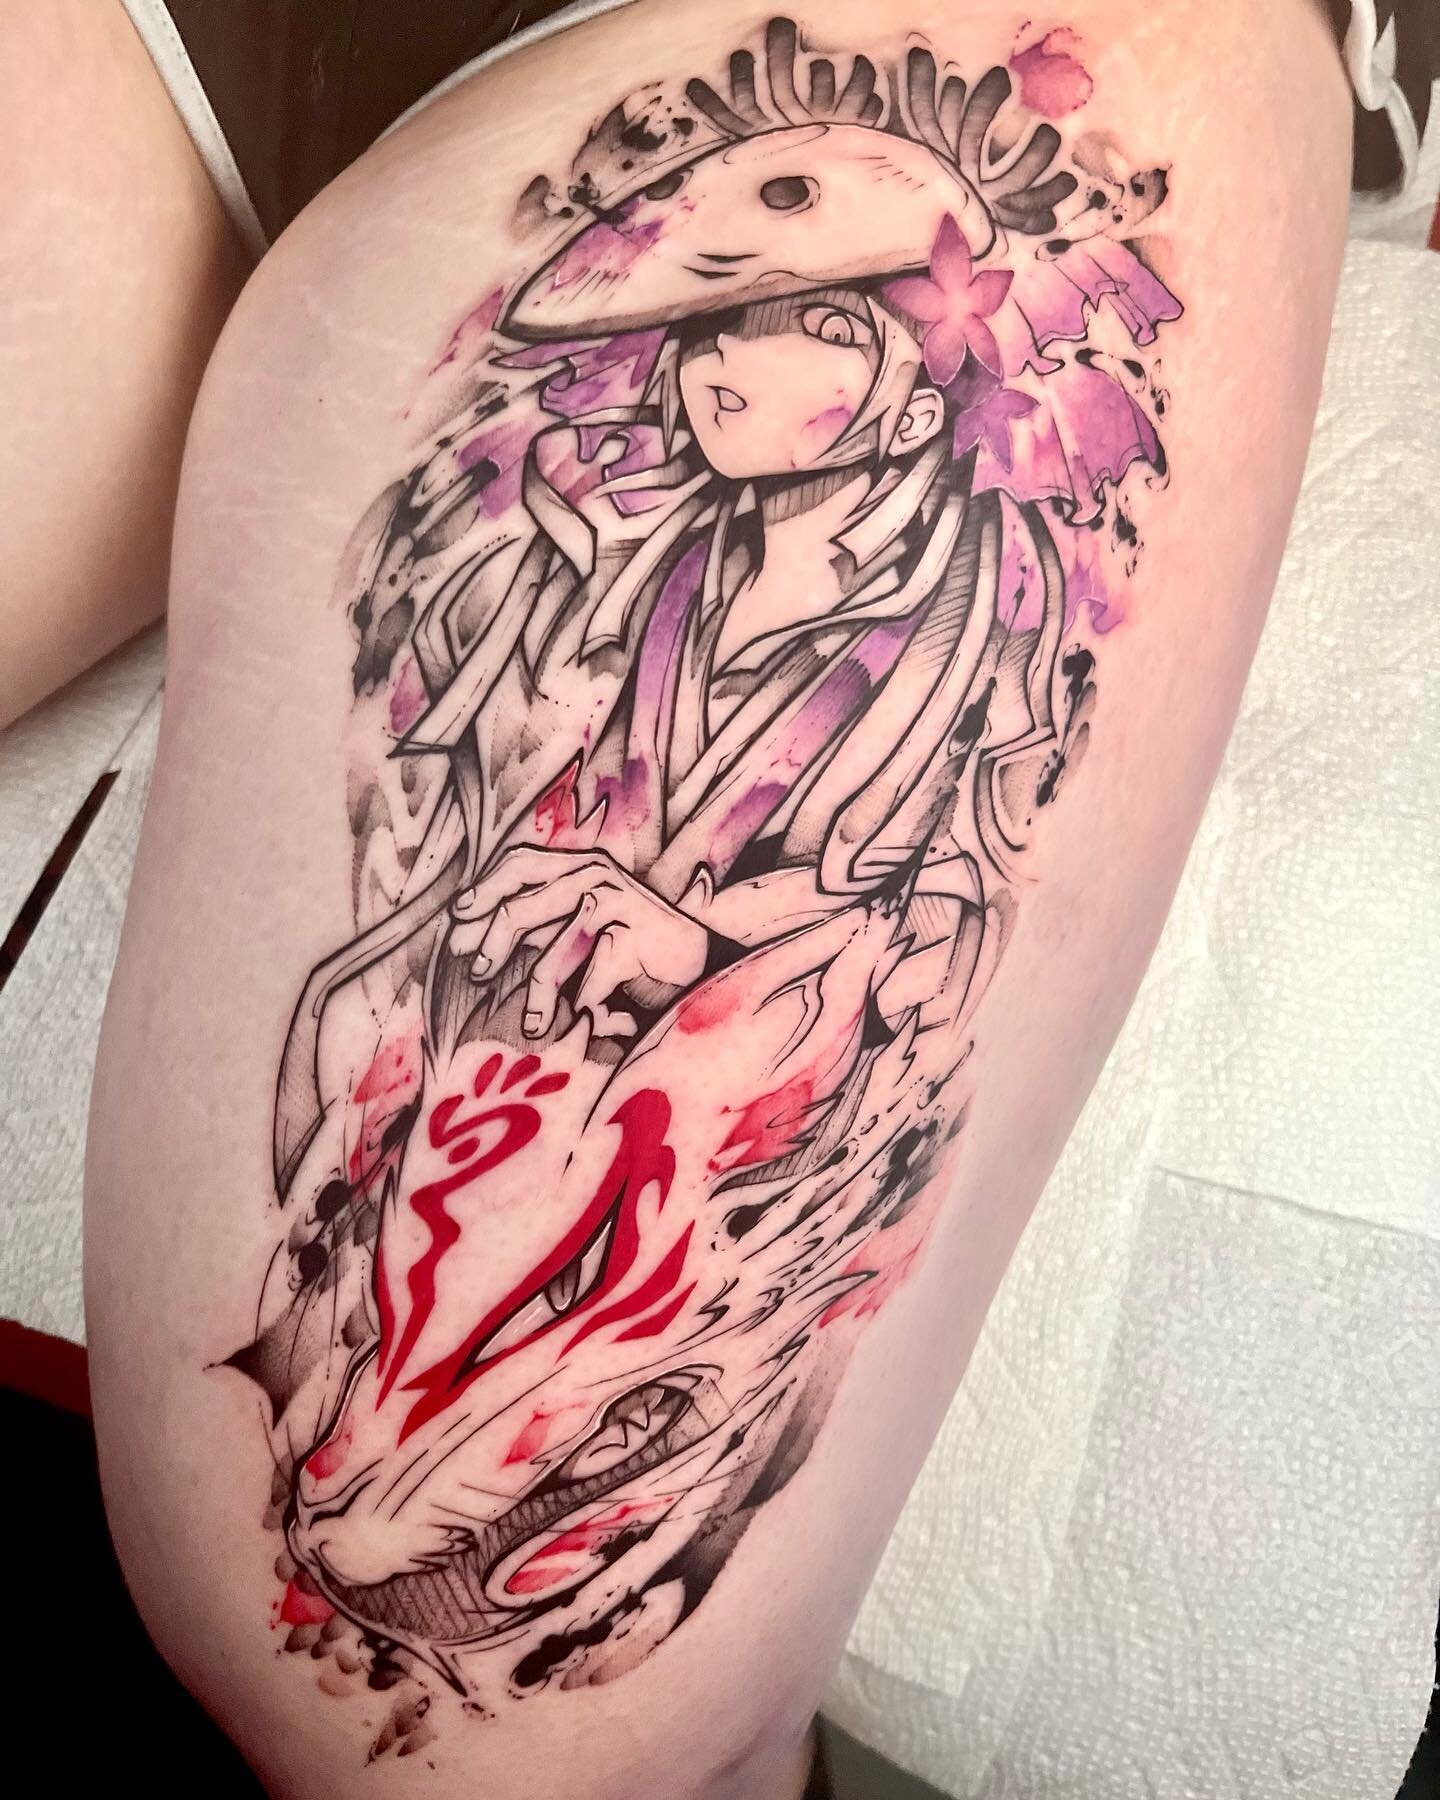 Natsume and Nyanko sensei from Natsume&rsquo;s Book of Friends! I&rsquo;ve never actually seen this one, but all the clips I watched for the tattoo were pretty funny tbh. Thanks @madisonjflowers for sitting so well and for picking something so cool! 